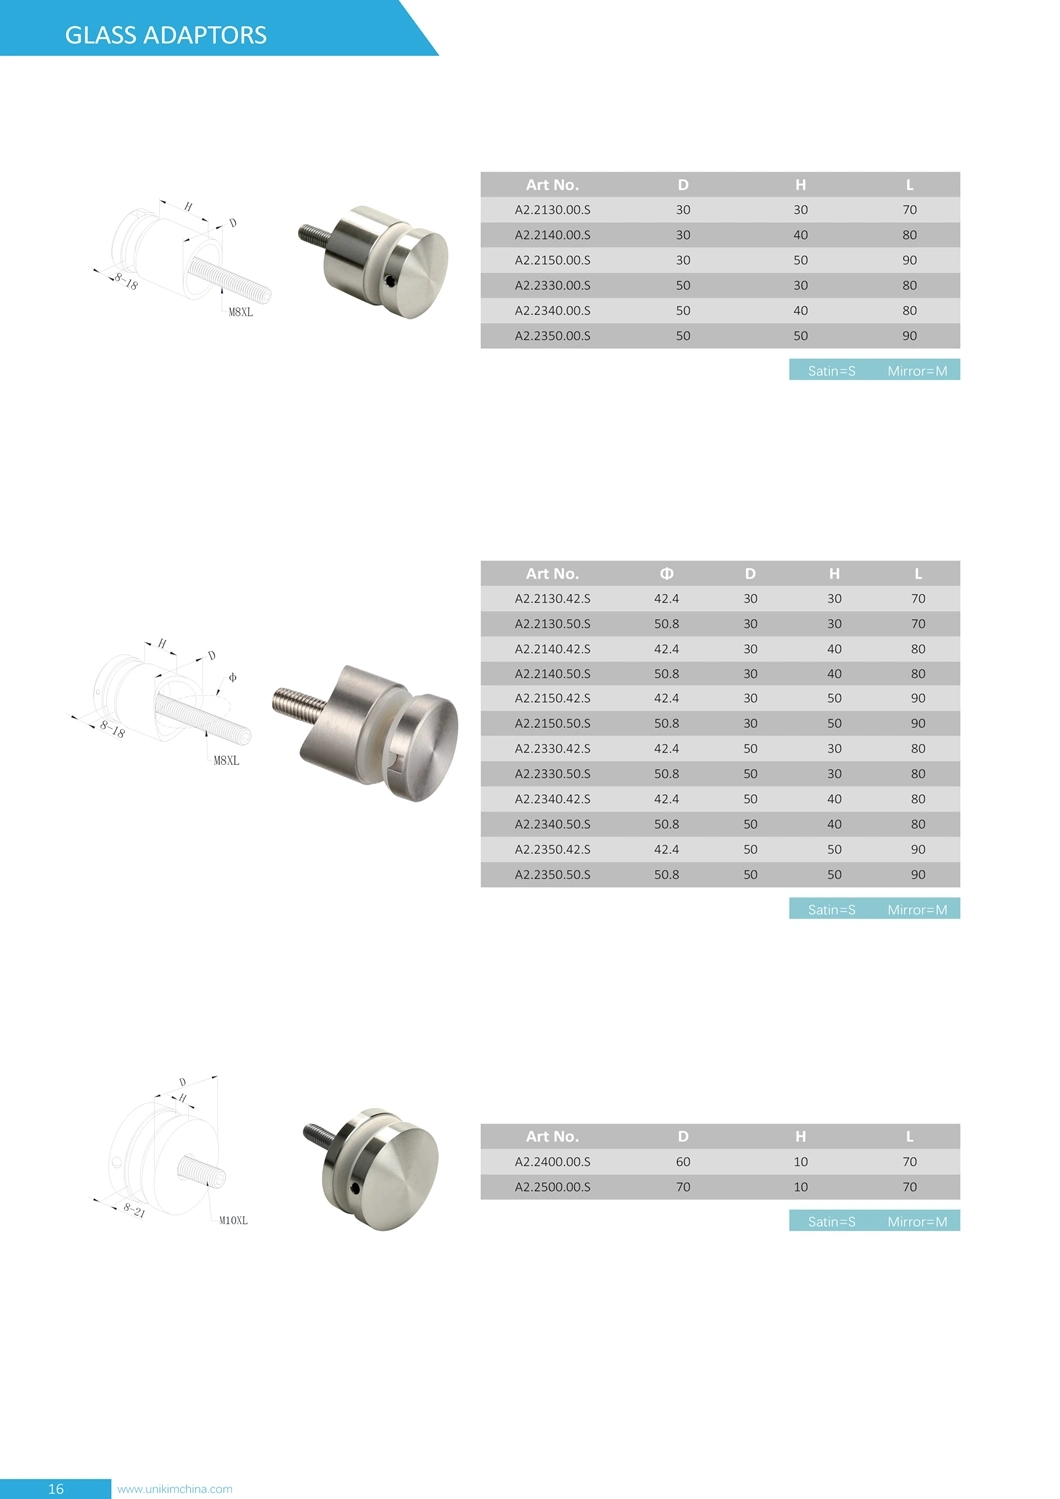 China Supplier Outdoor Stainless Steel Glass Balustrade Fittings for Stair Railing with Ce